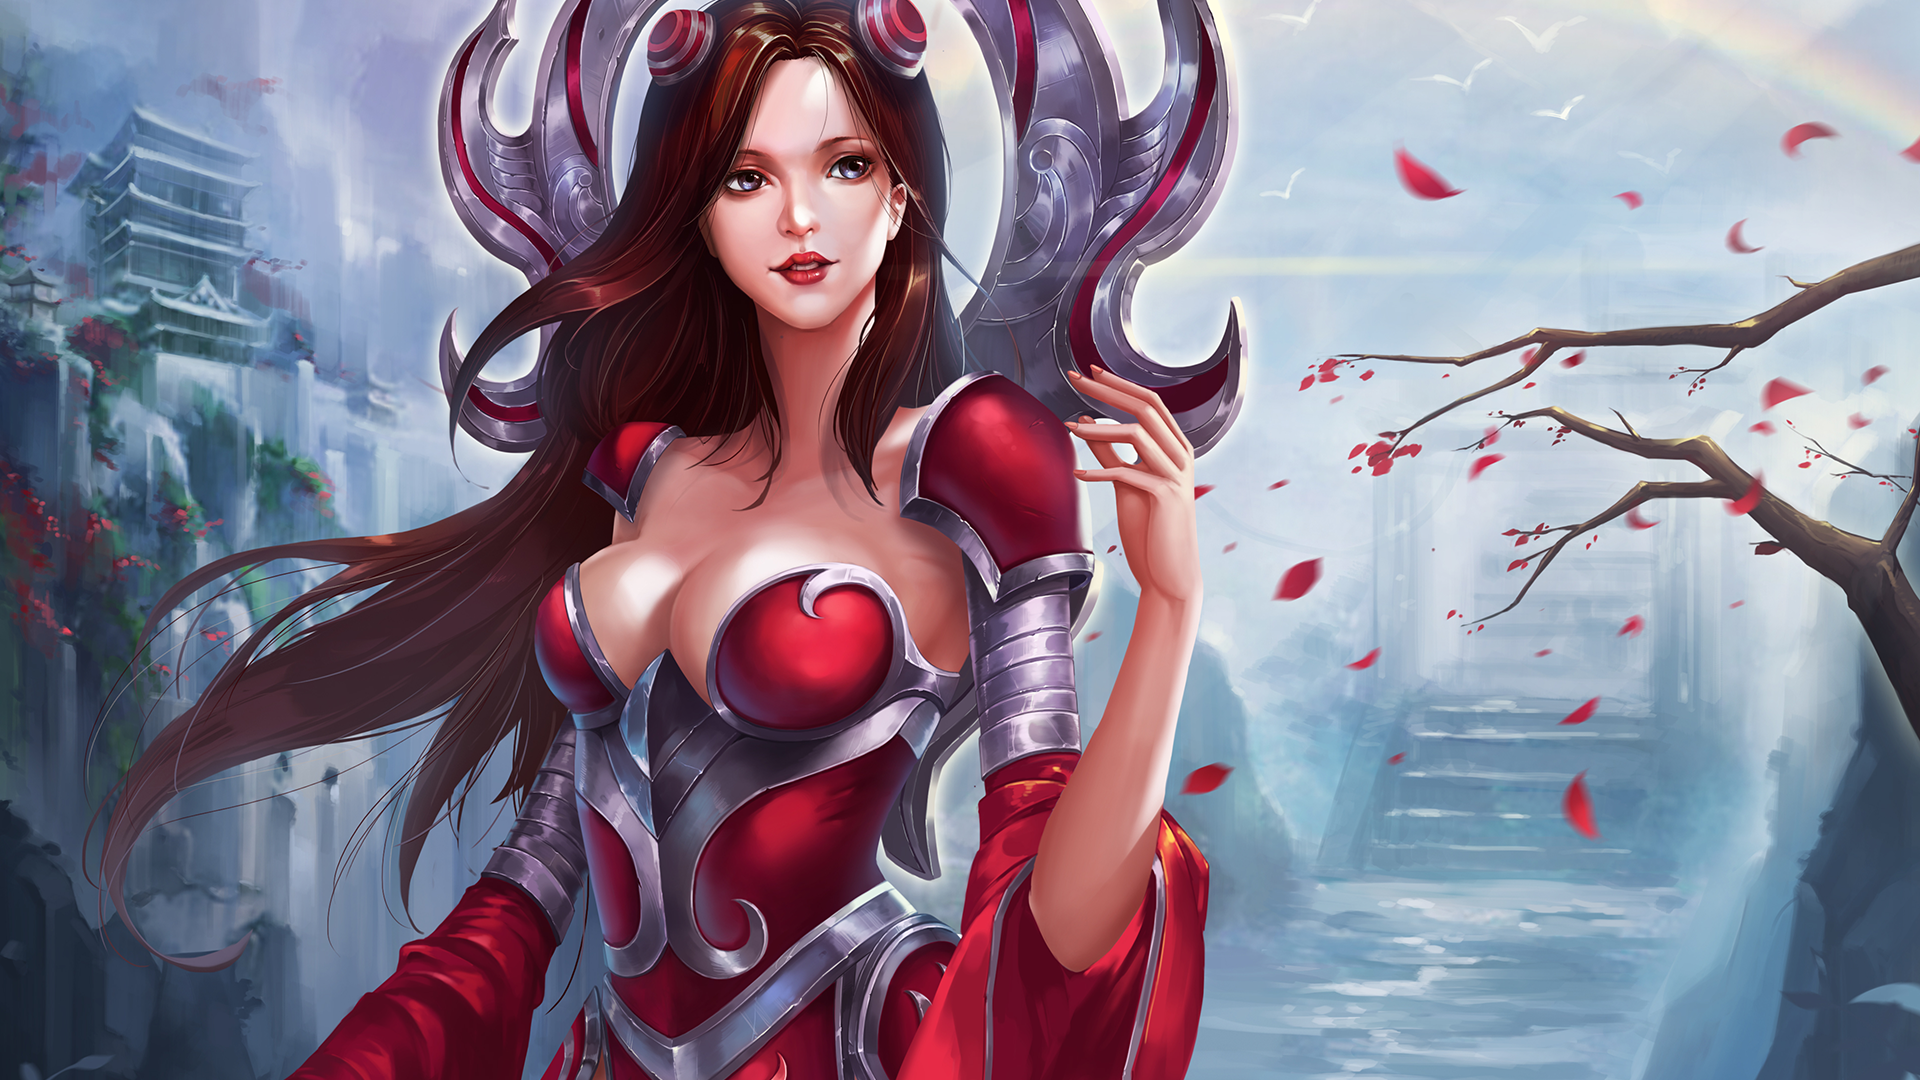 Anime 1920x1080 League of Legends cleavage PC gaming video game art Pixiv anime girls fantasy girl women video game girls boobs long hair fantasy armor